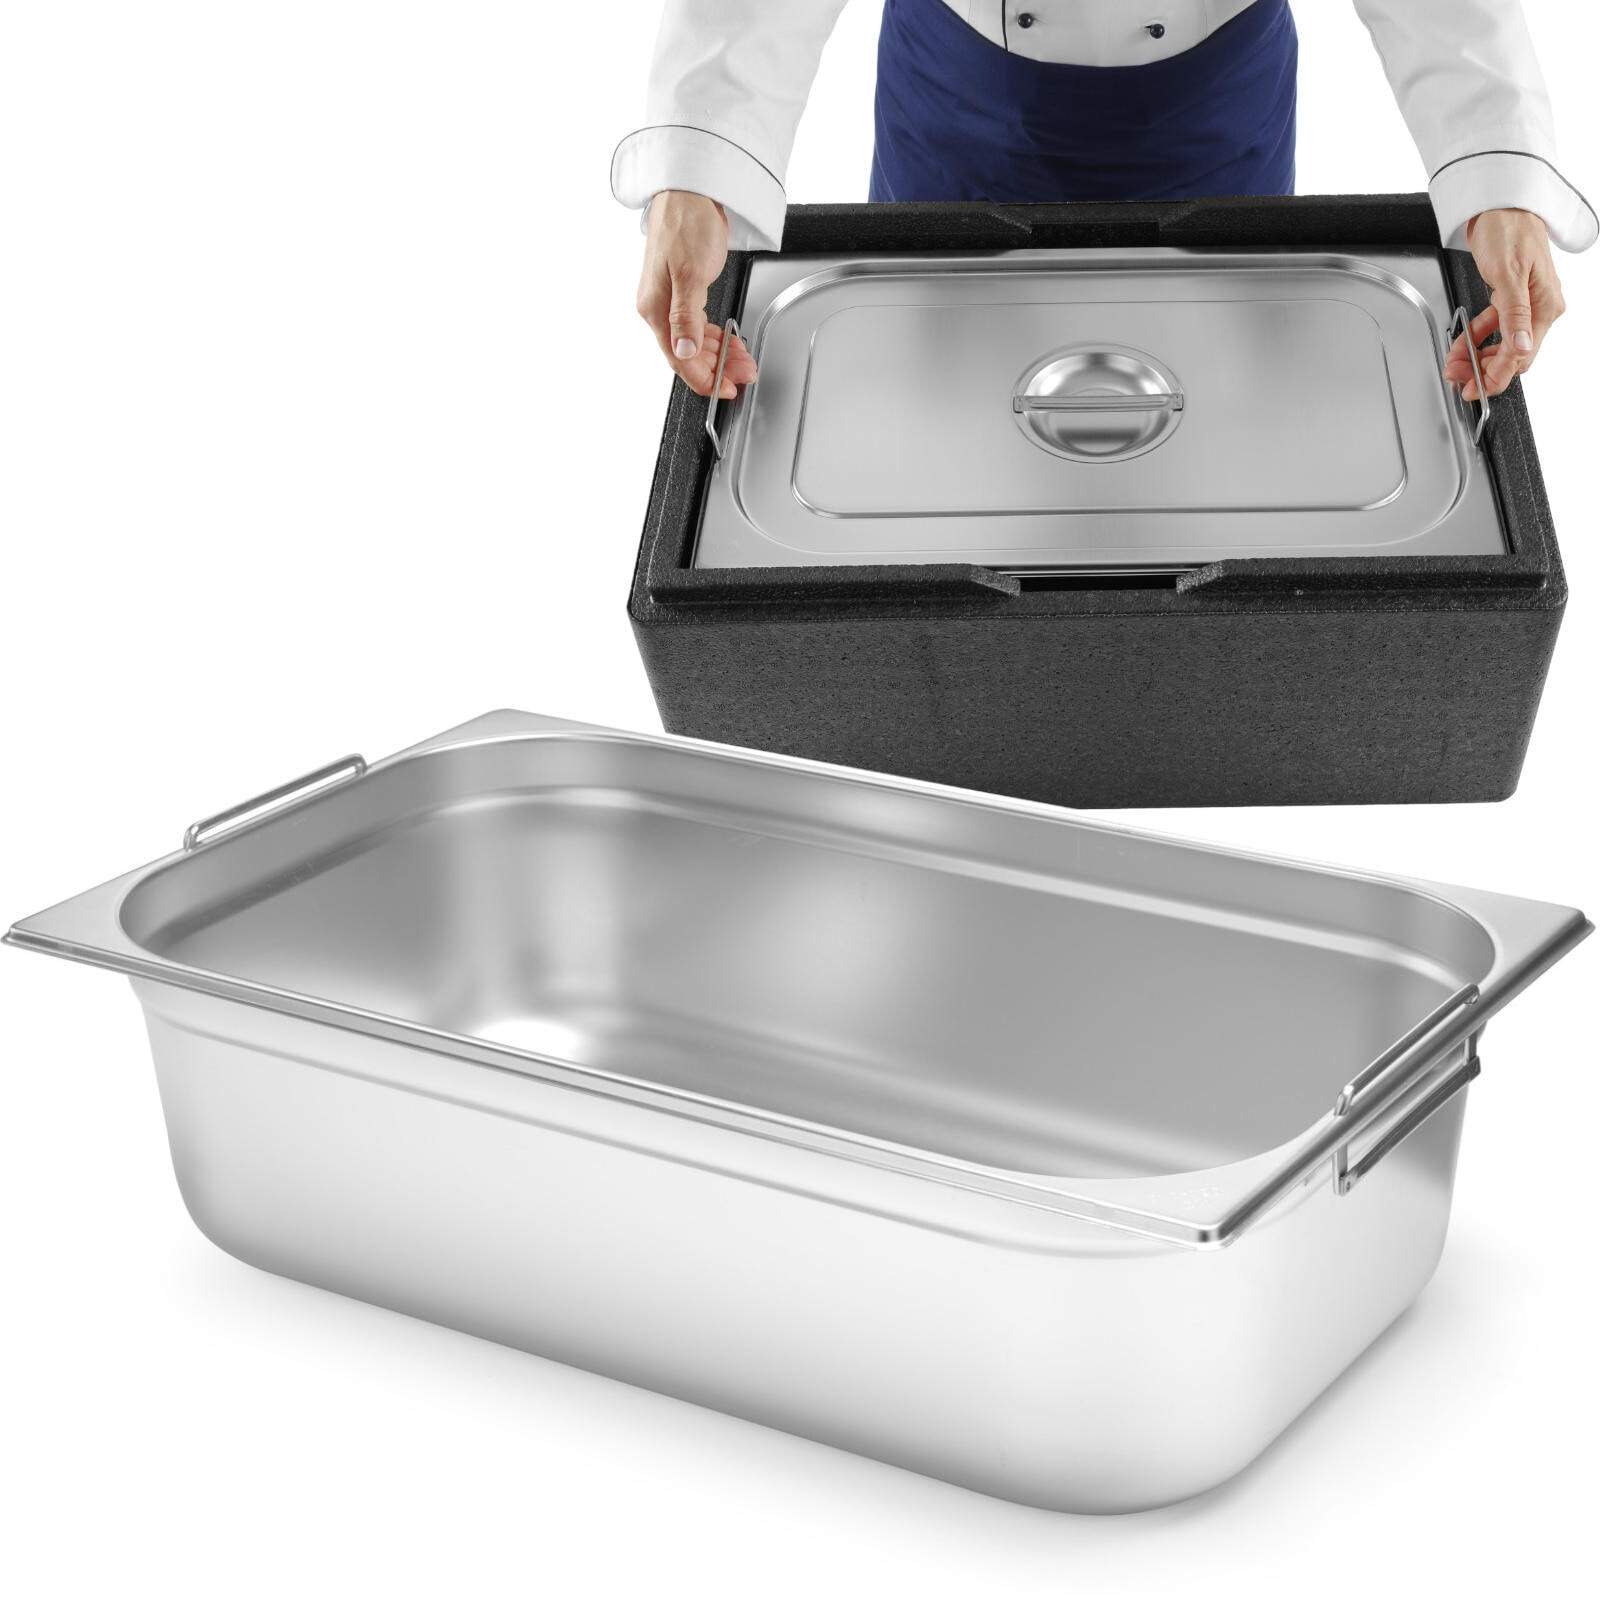 Gastronomy container GN 1/1 with retractable handles 530x325x200mm 28L Hendi 817155